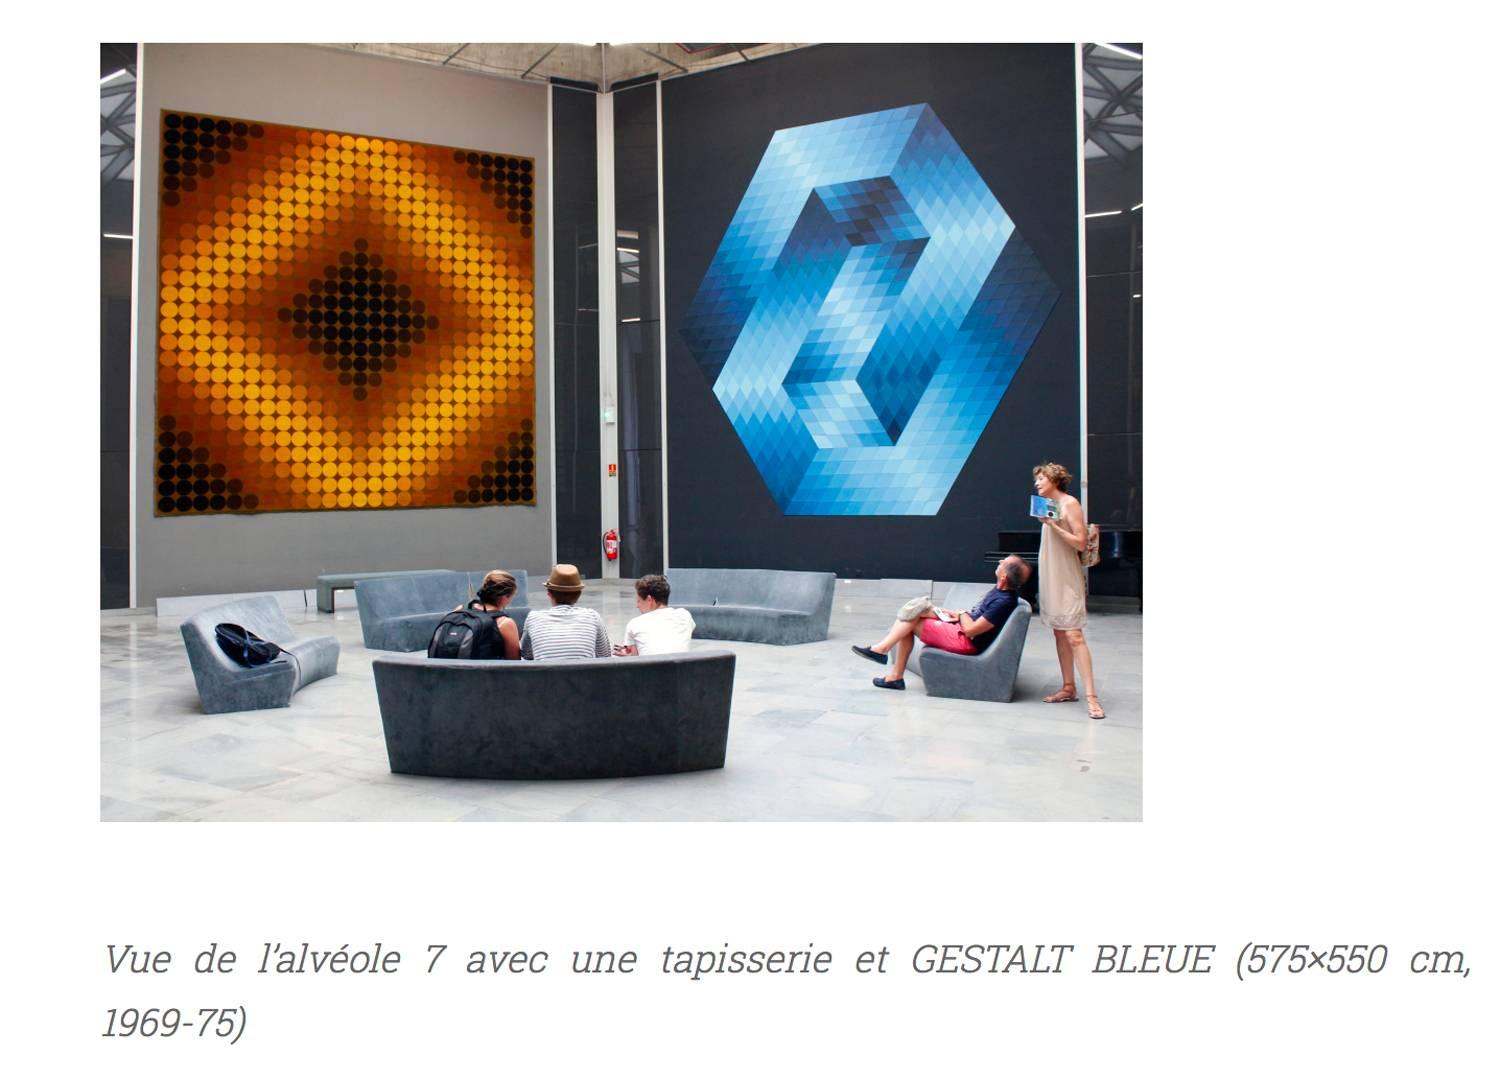 Victor Vasarely : Dia-or - 1967.

Workshop: Atelier Tabard Frères & sœurs - Aubusson.
Vasarely (woven center).
Atelier Monogram (woven center).

Signed Vasarely by himself on the reverse.

In the second picture, there is the same tapestry at the